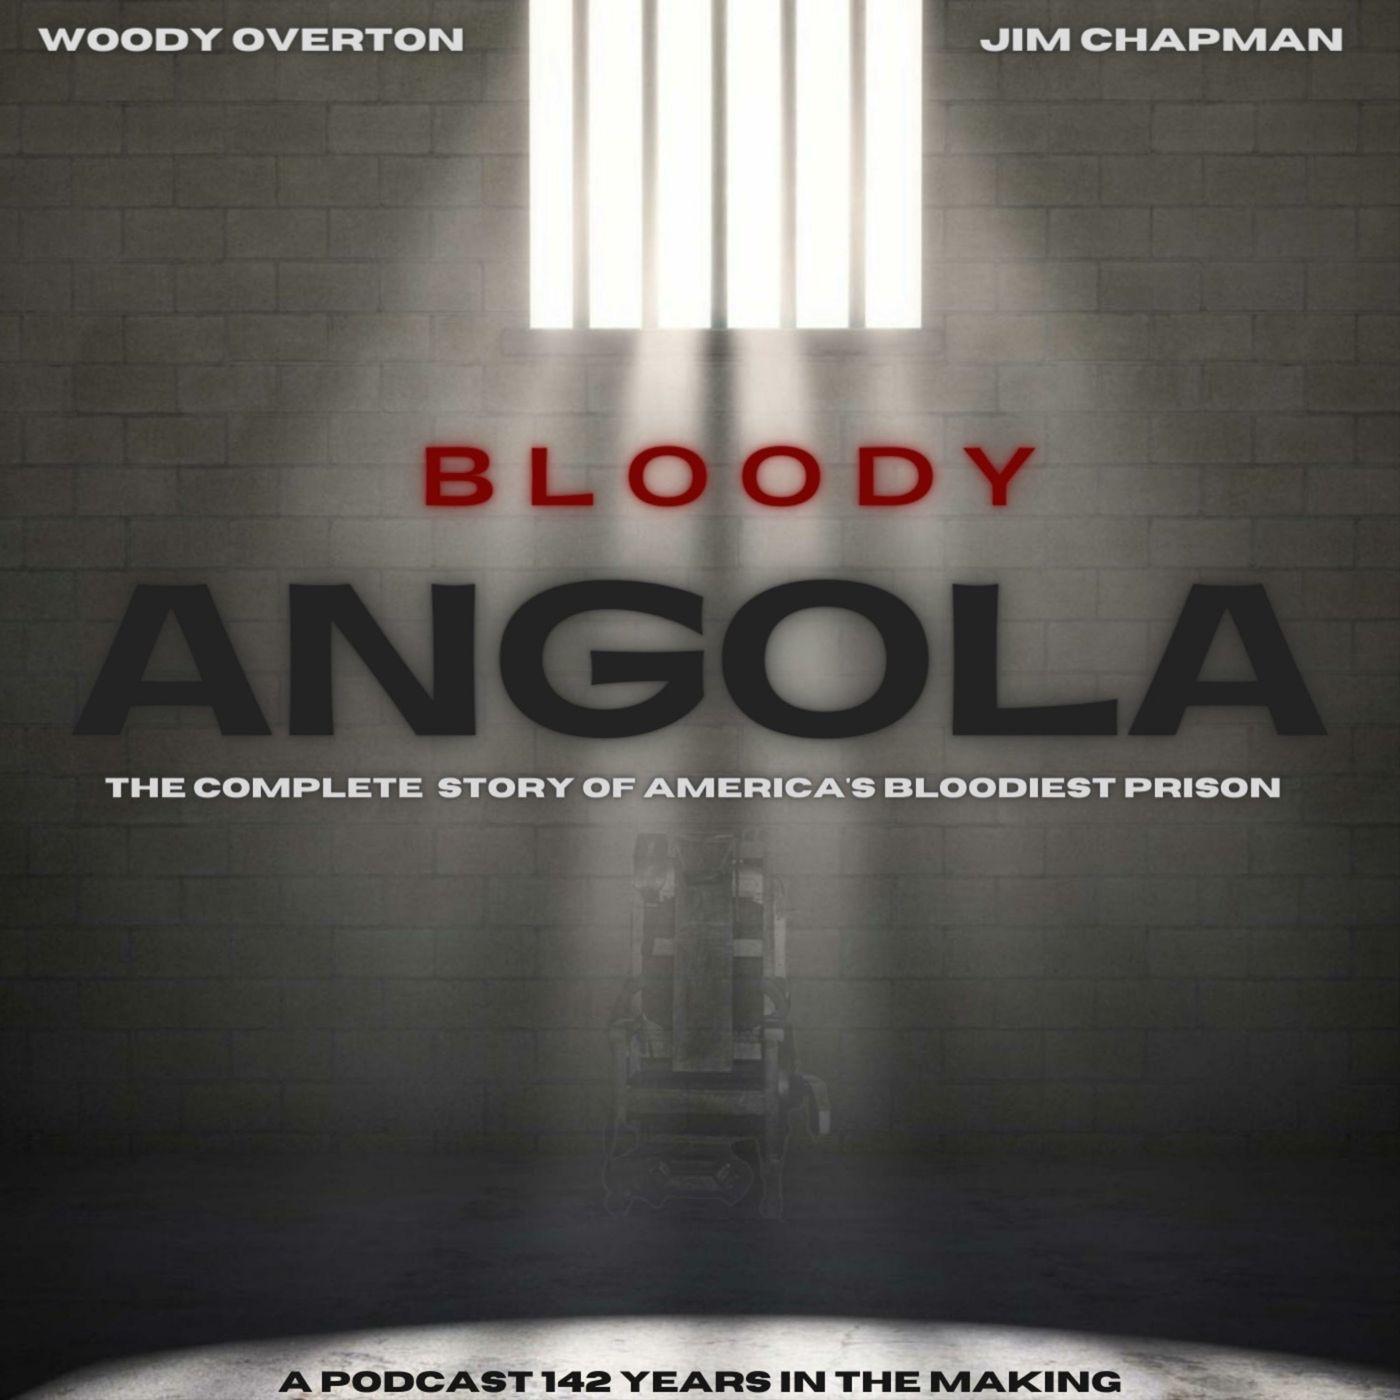 Bloody Angola Podcast by Woody Overton & Jim Chapman   RedCircle